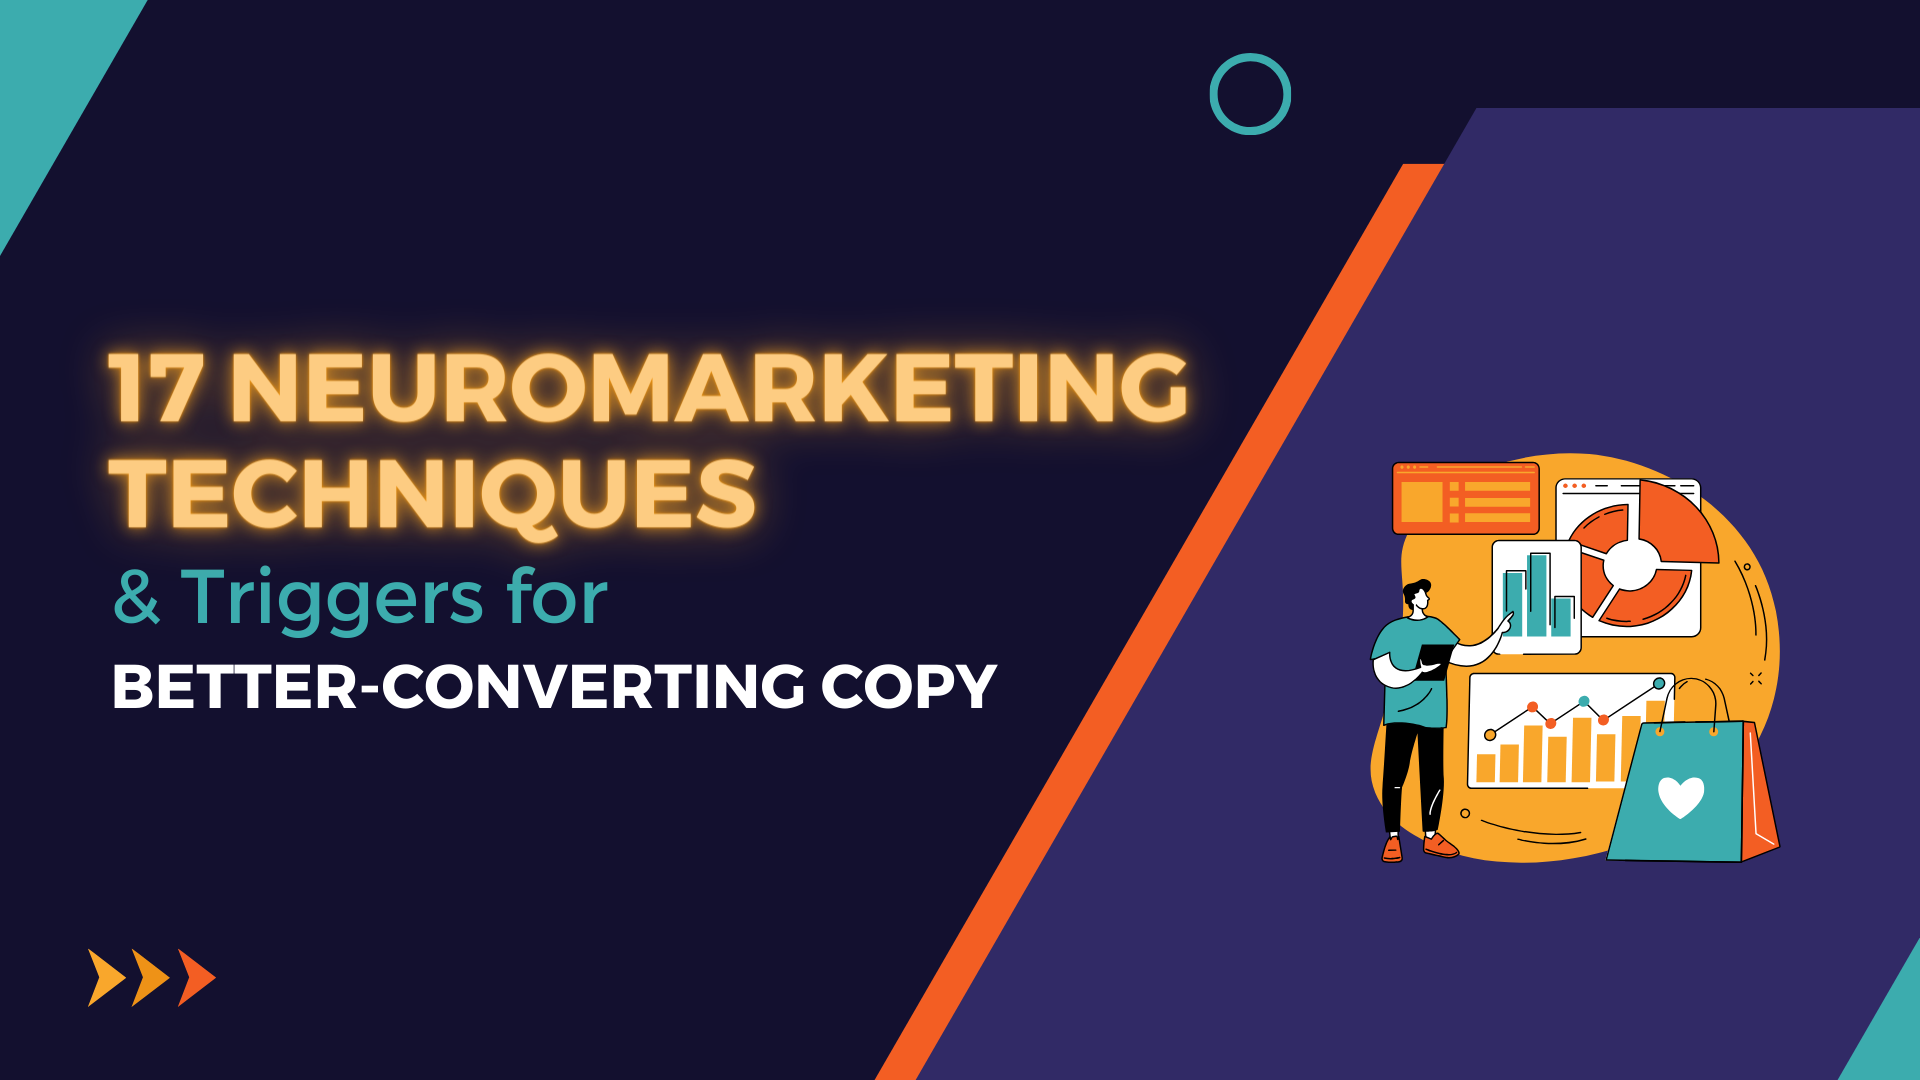 17 Neuromarketing Techniques & Triggers for Better-Converting Copy